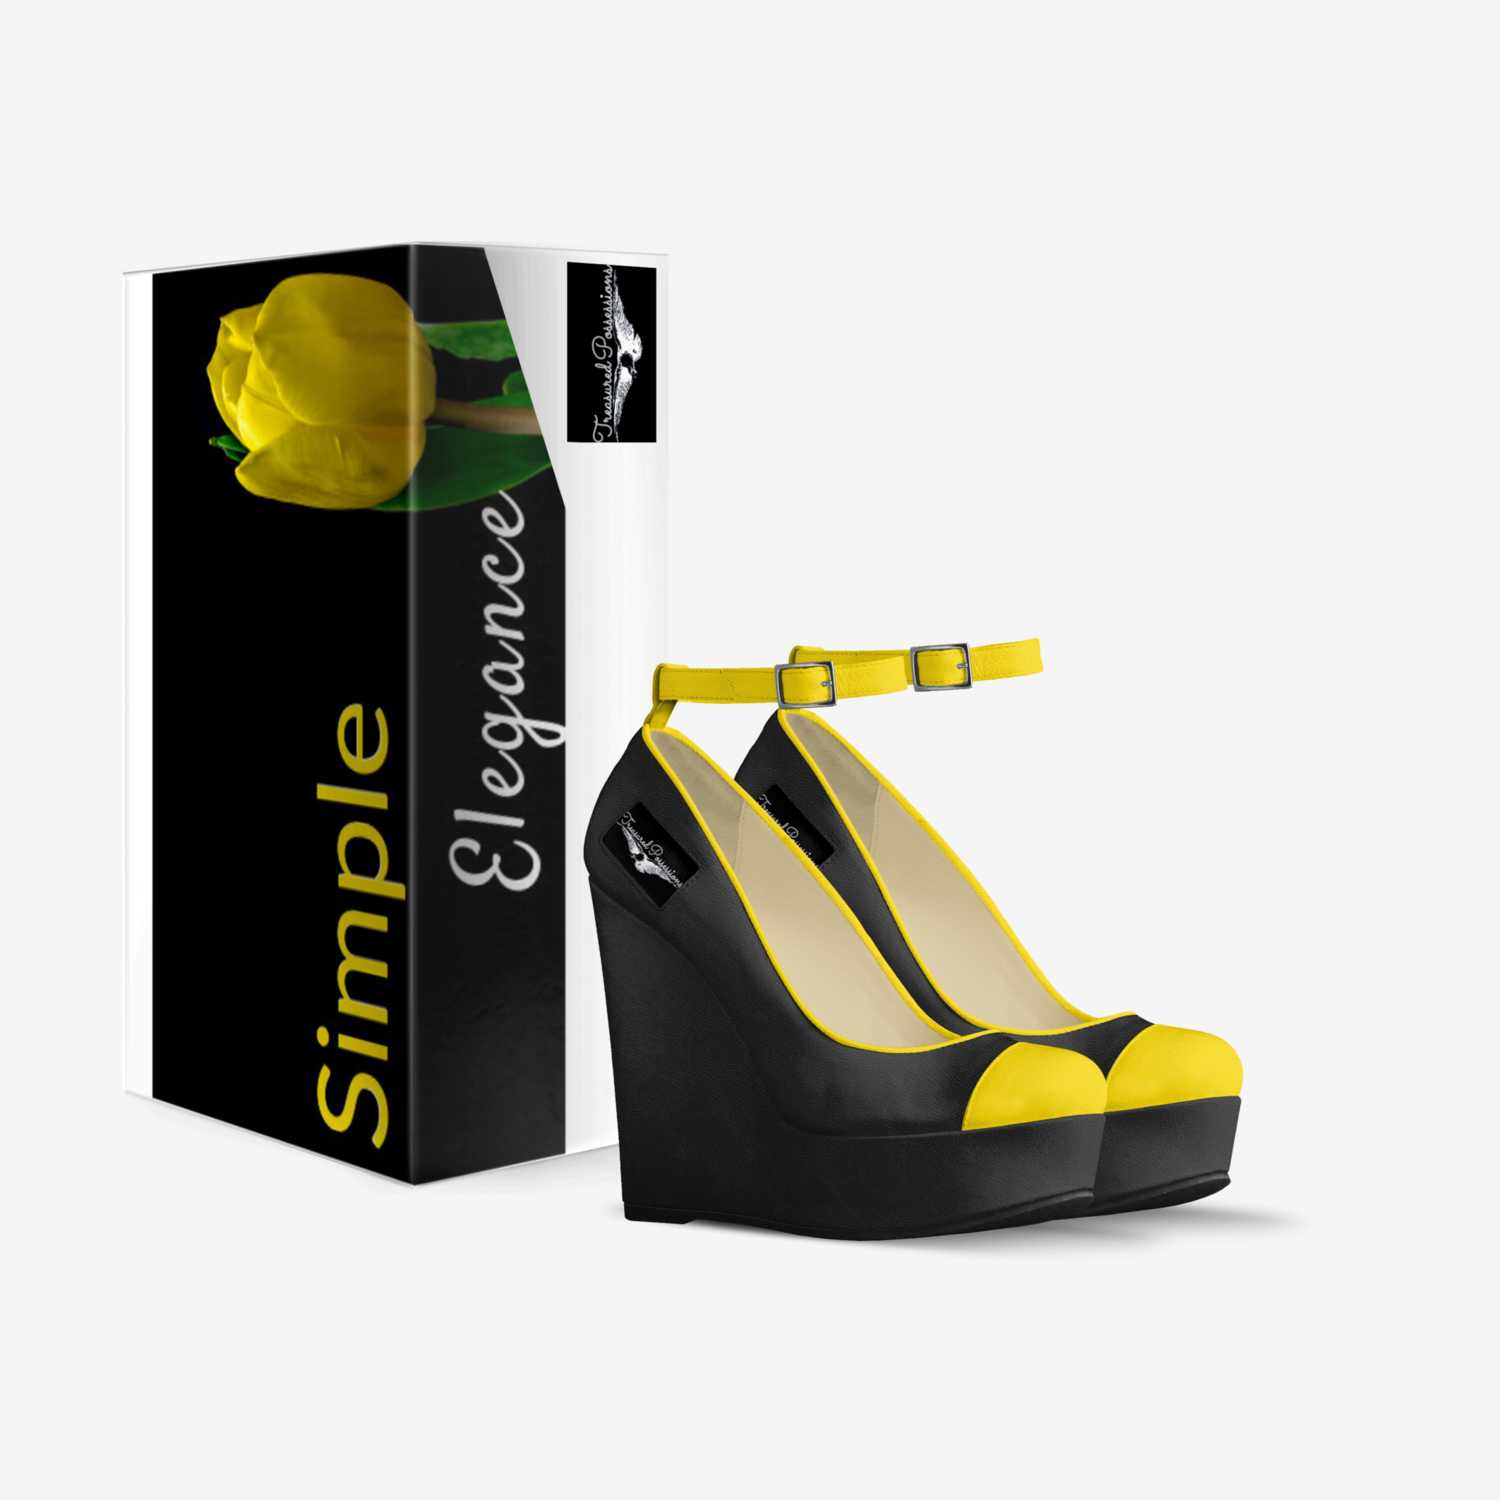 Simple Elegance custom made in Italy shoes by Chavez Mckee | Box view